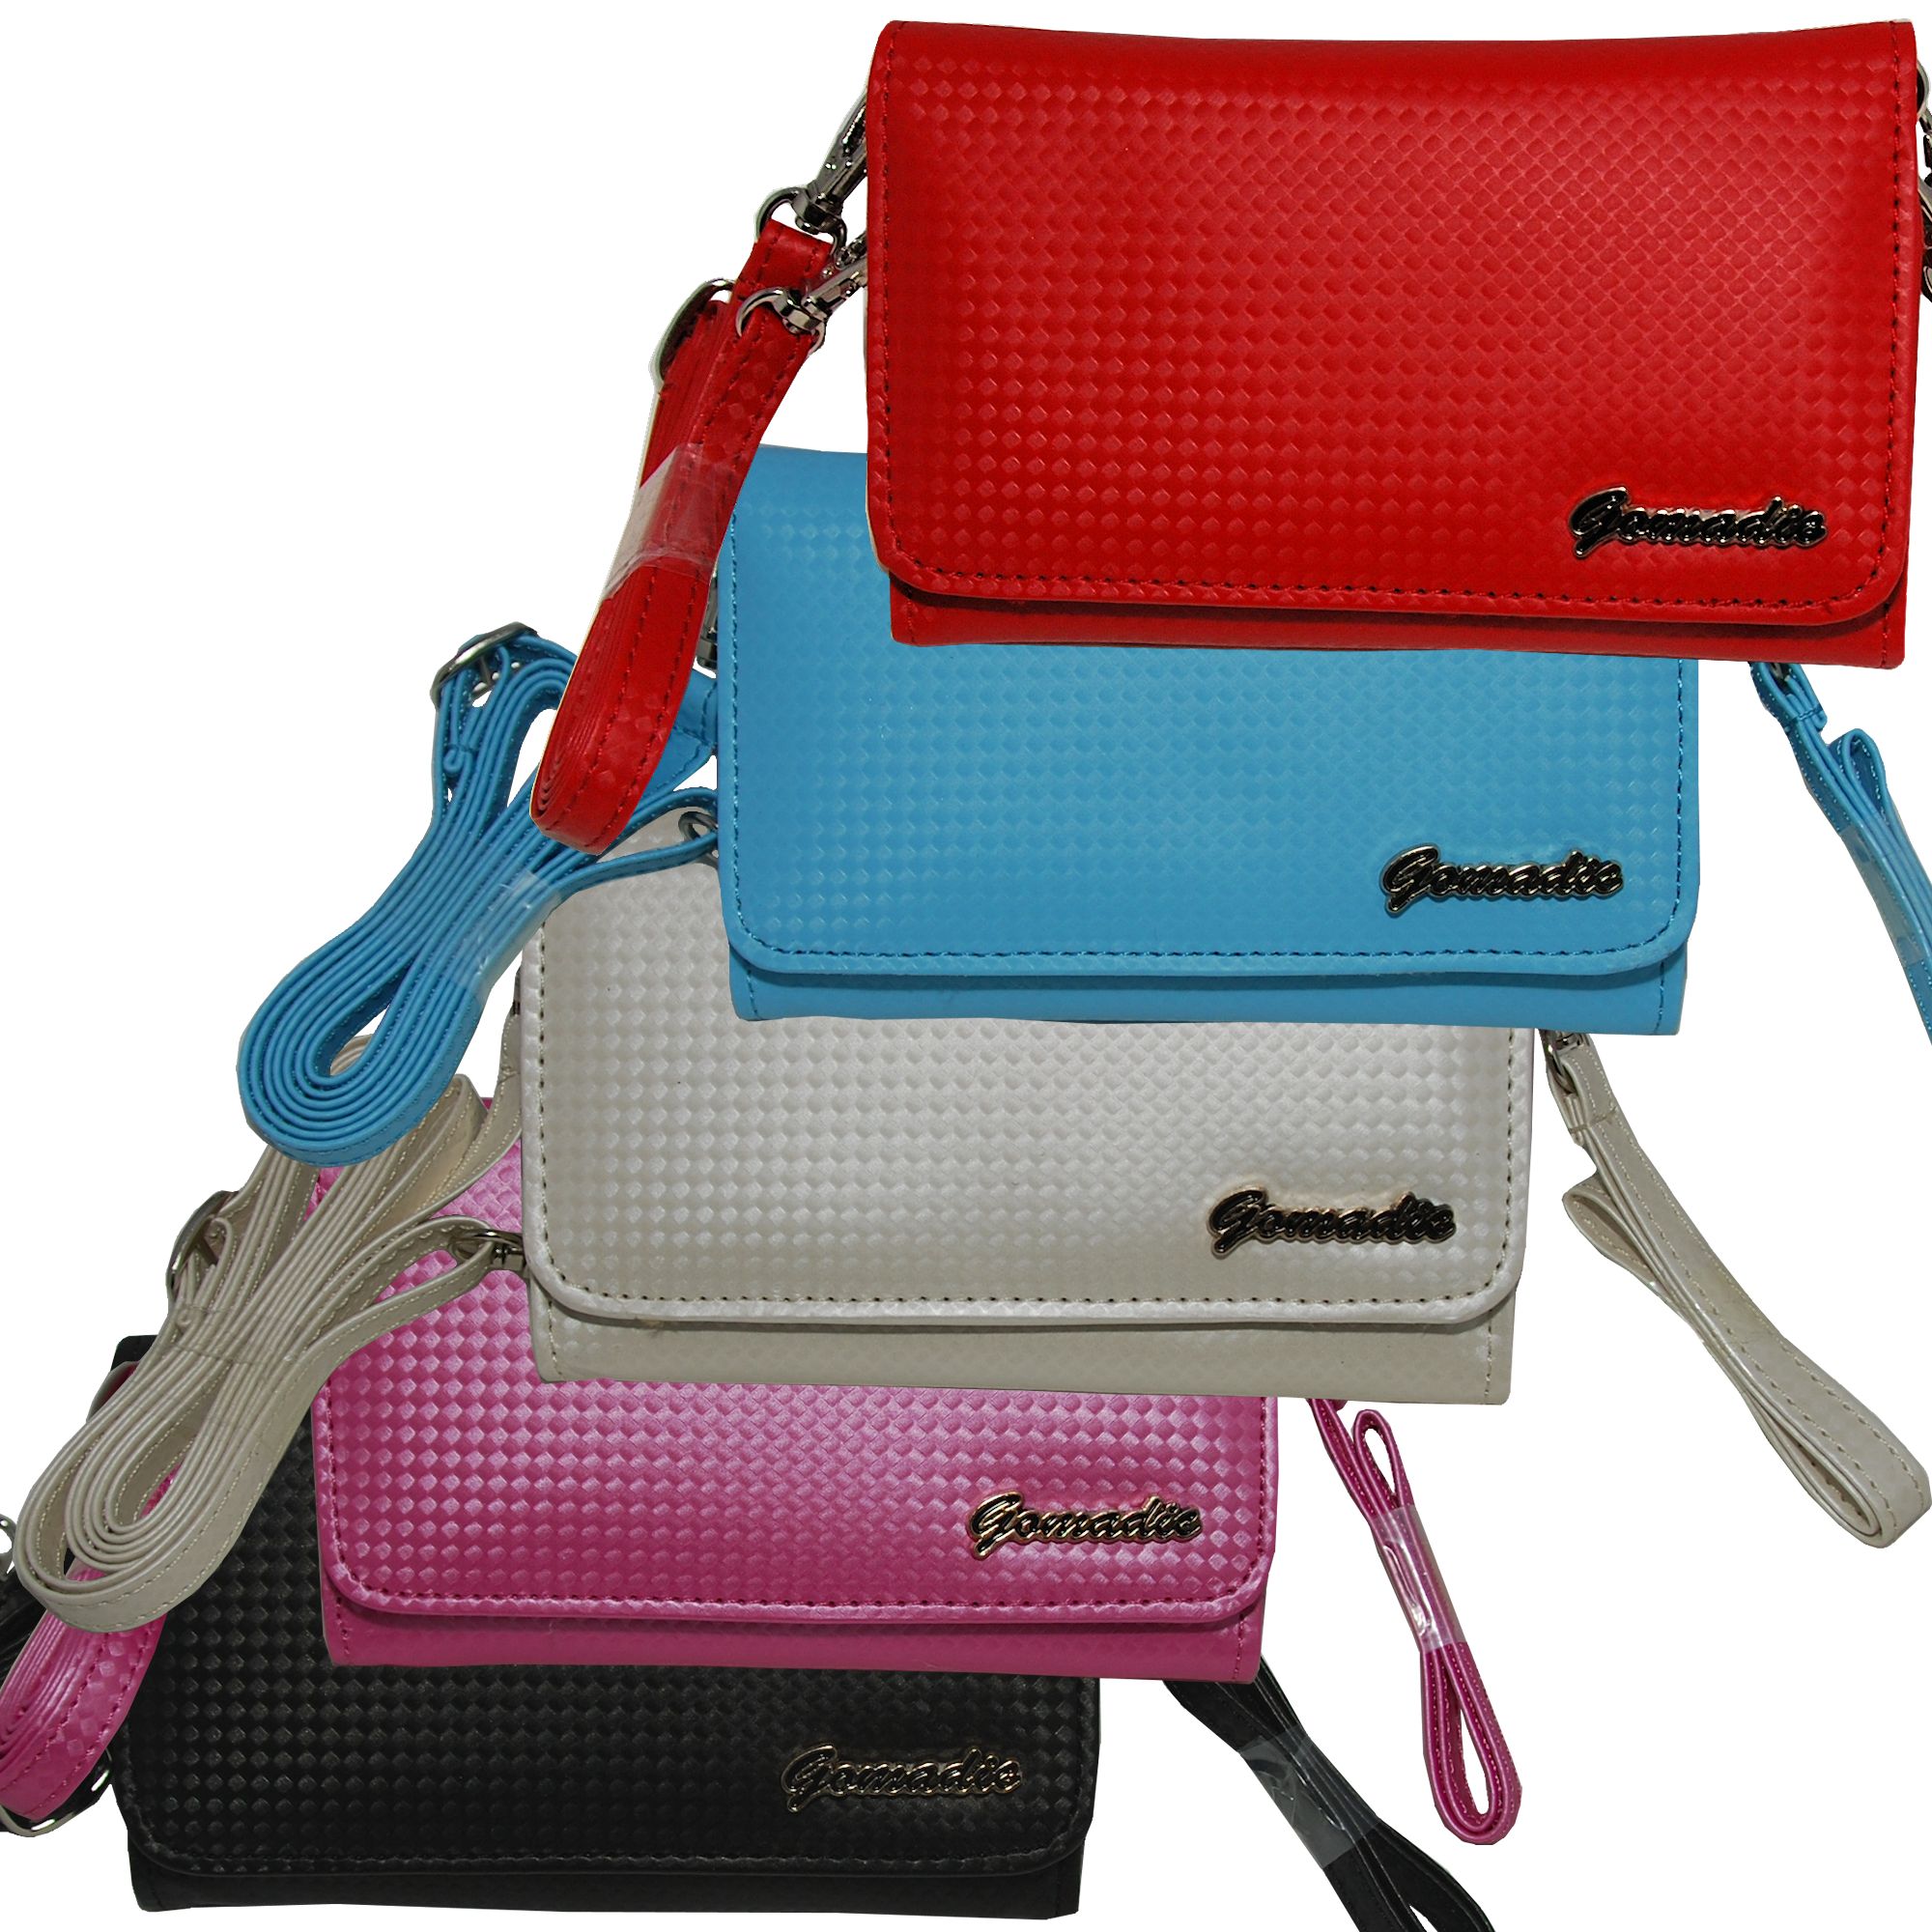 Purse Handbag Case for the Nokia 3555 3610 3711  - Color Options Blue Pink White Black and Red